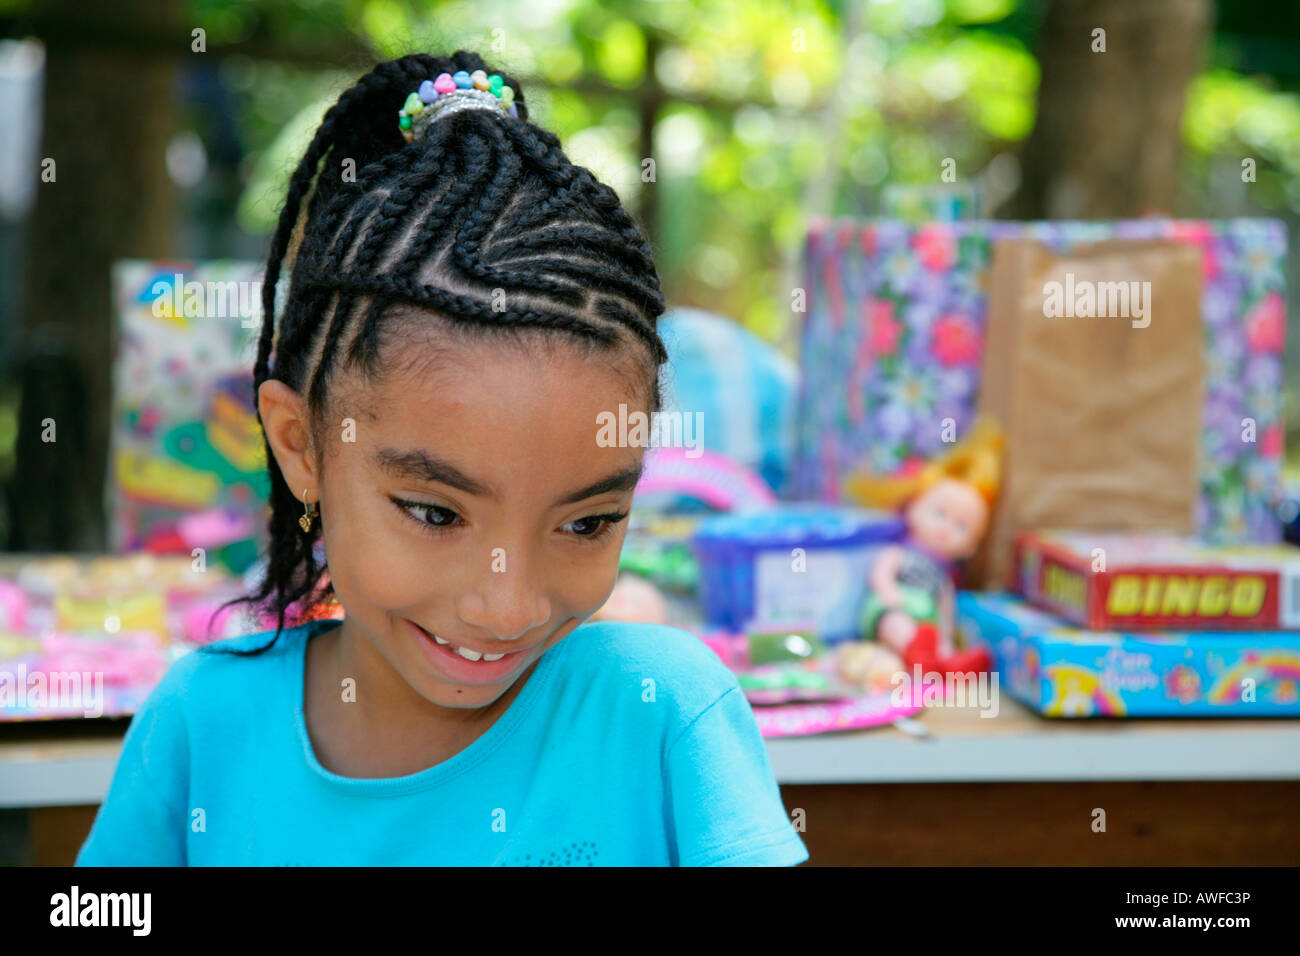 Young girl with braids in her hair, Georgetown, Guyana, South America Stock Photo